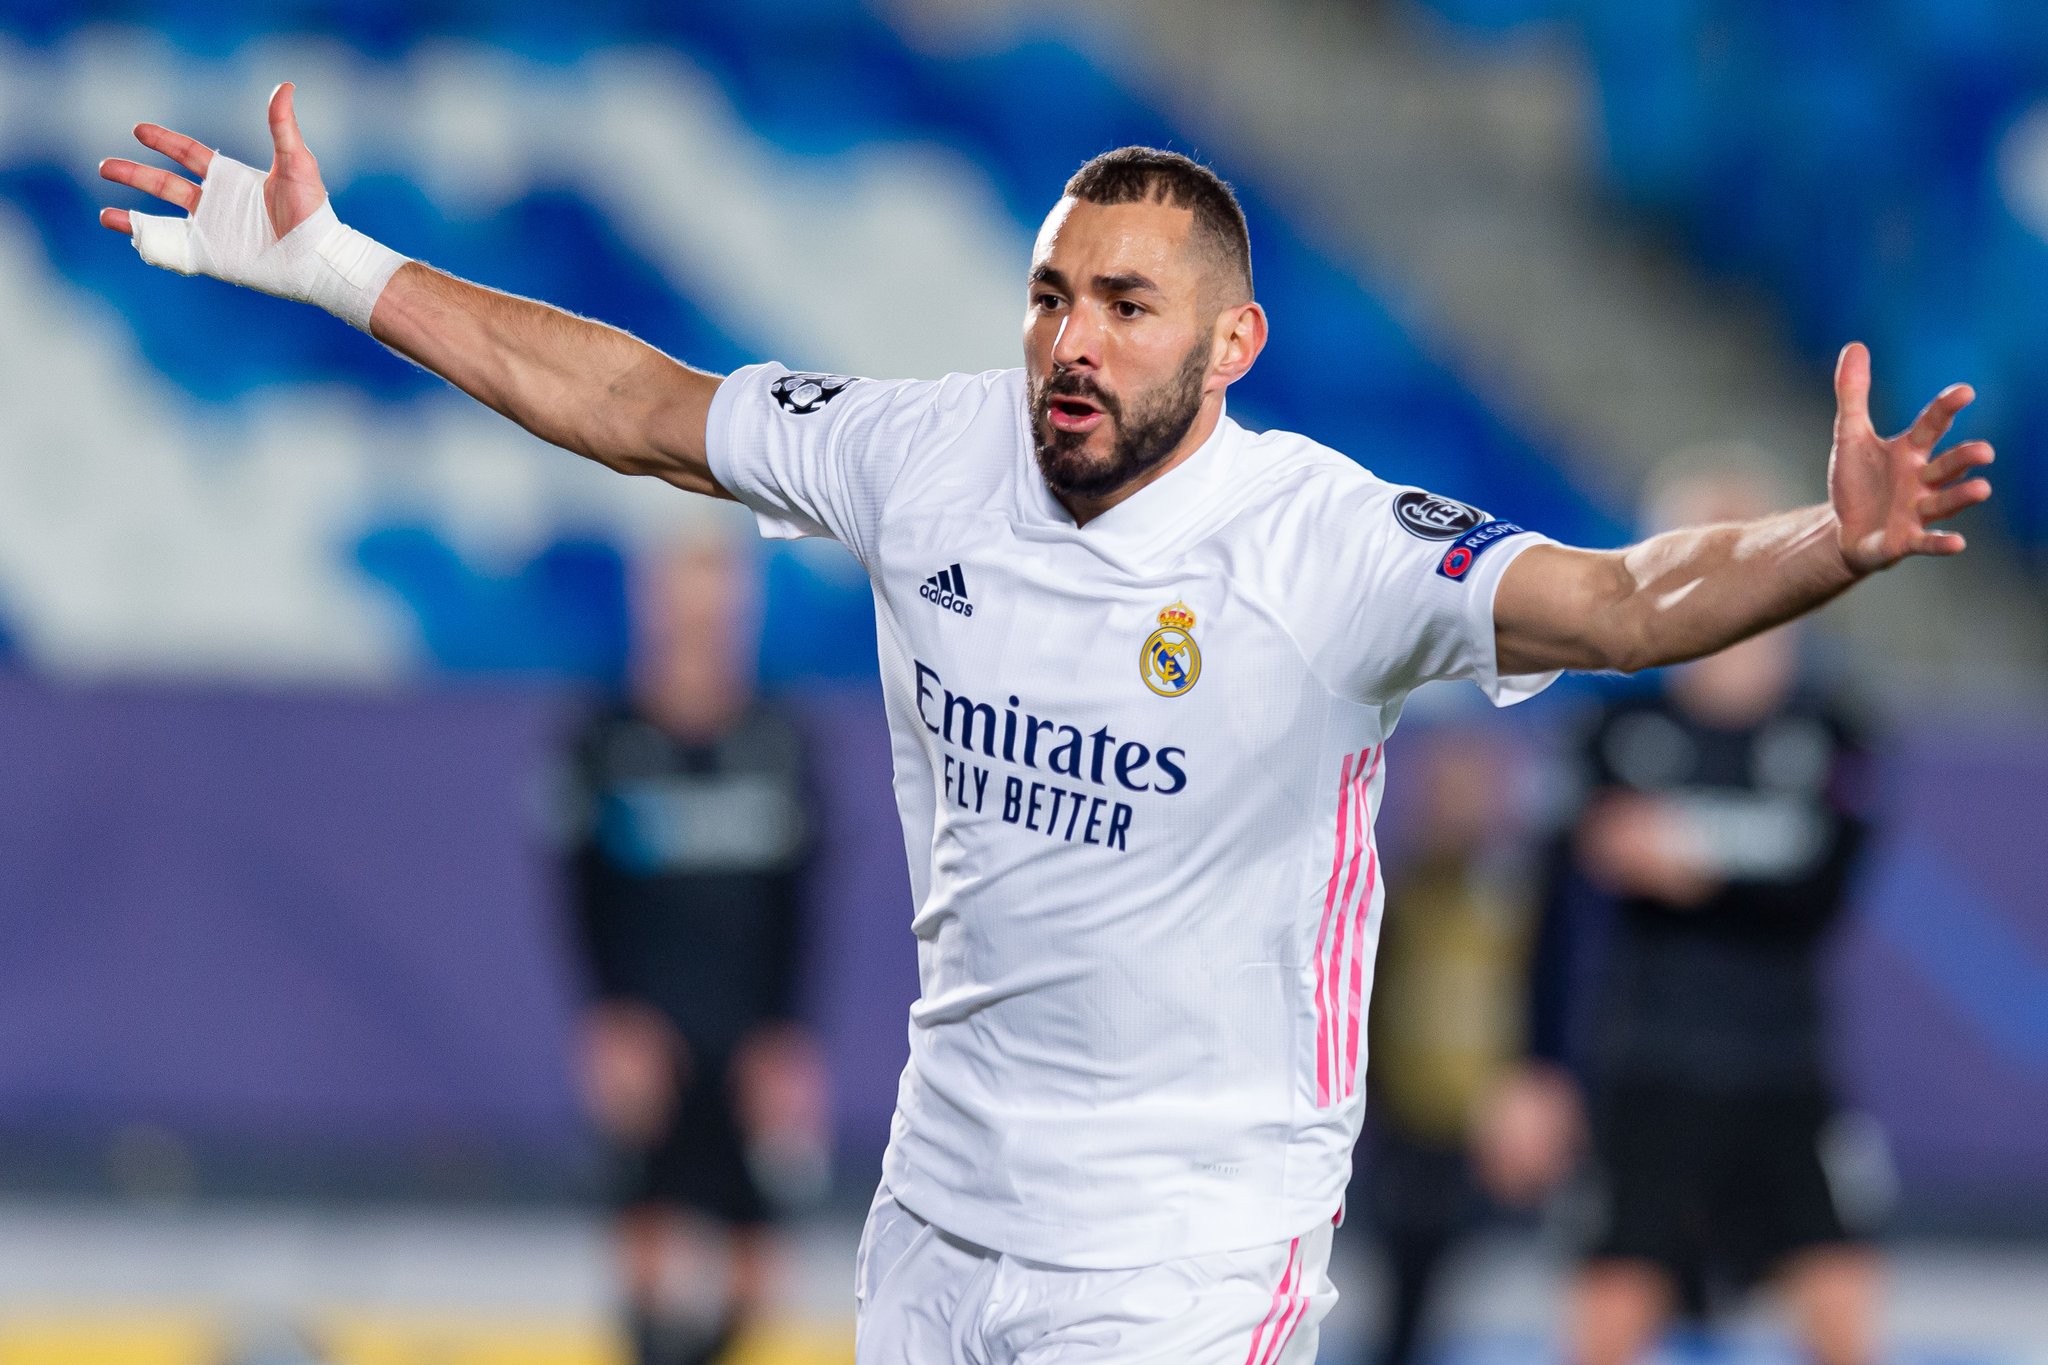 Champions League: Karim Benzema takes Real Madrid through to Round of 16; Inter Milan out